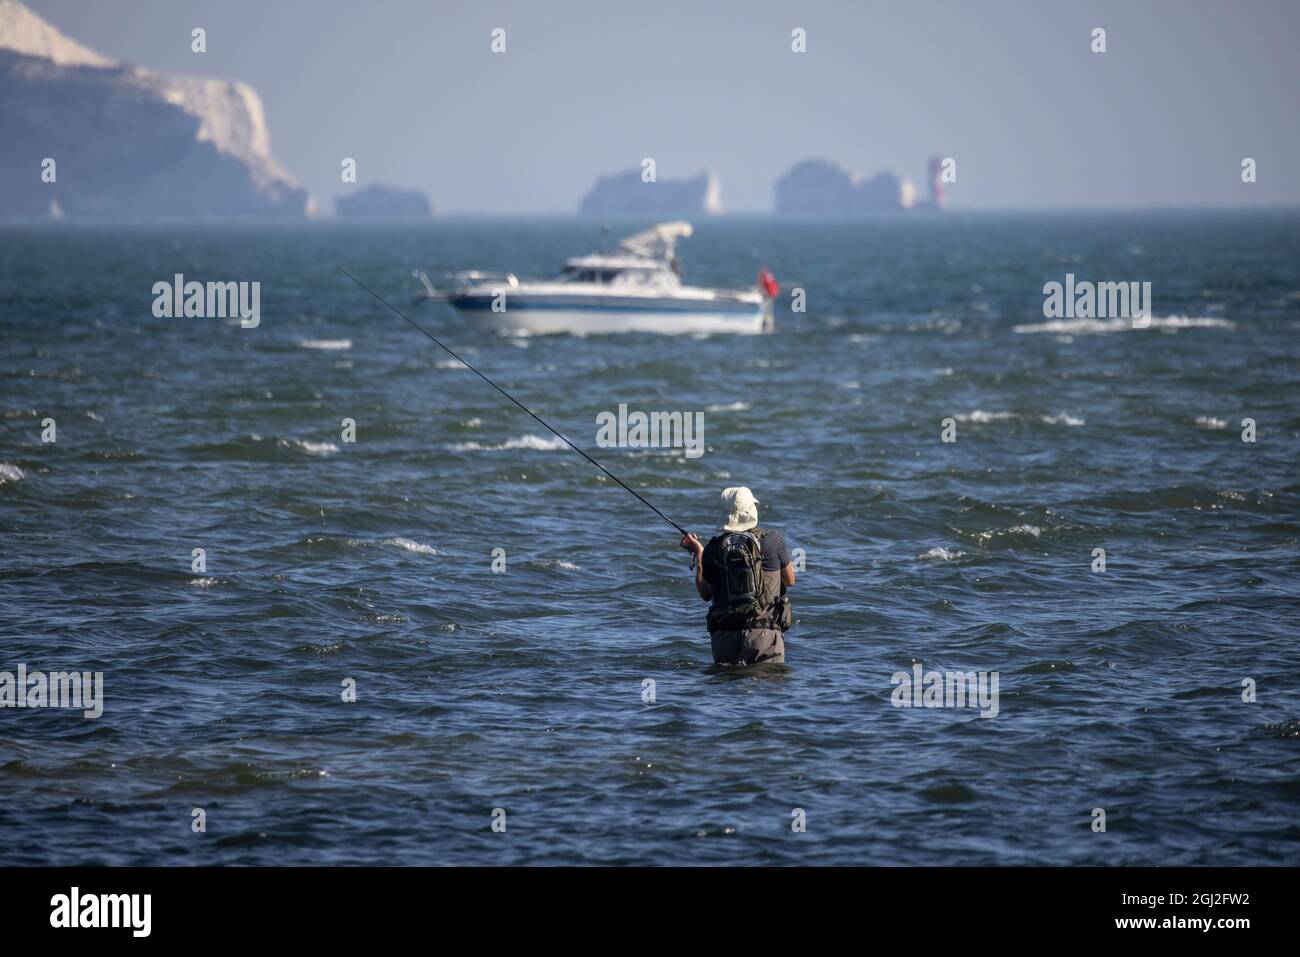 A fisherman in waders casts his line out in the Solent shallow stretch of tidal water with Isle of Weight in distance, Hampshire and Dorset coastline. Stock Photo